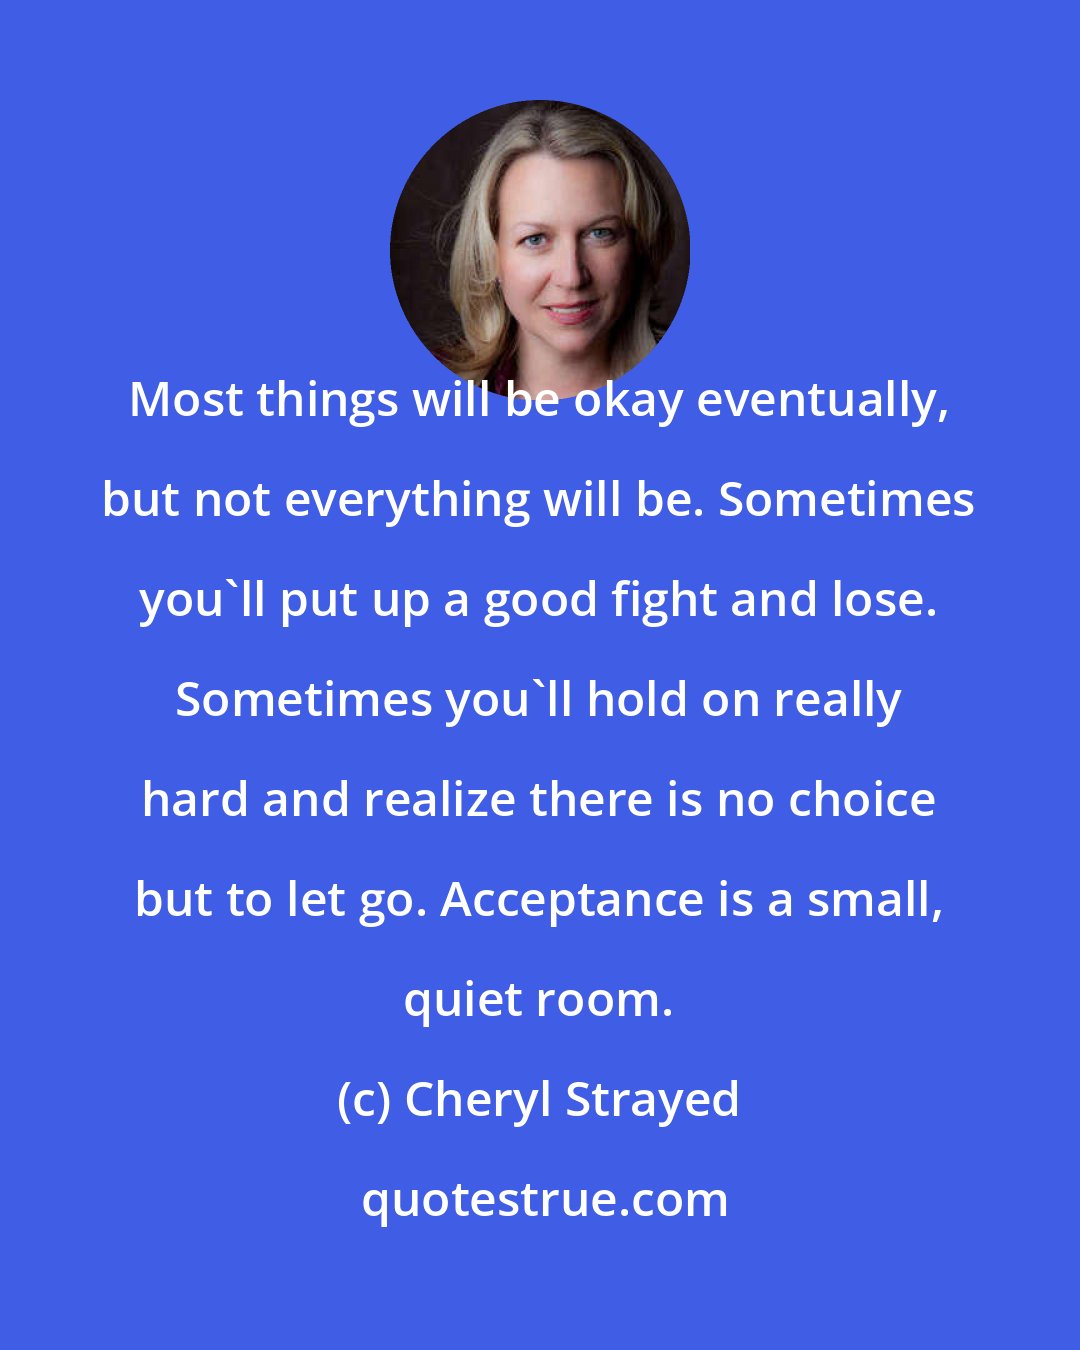 Cheryl Strayed: Most things will be okay eventually, but not everything will be. Sometimes you'll put up a good fight and lose. Sometimes you'll hold on really hard and realize there is no choice but to let go. Acceptance is a small, quiet room.